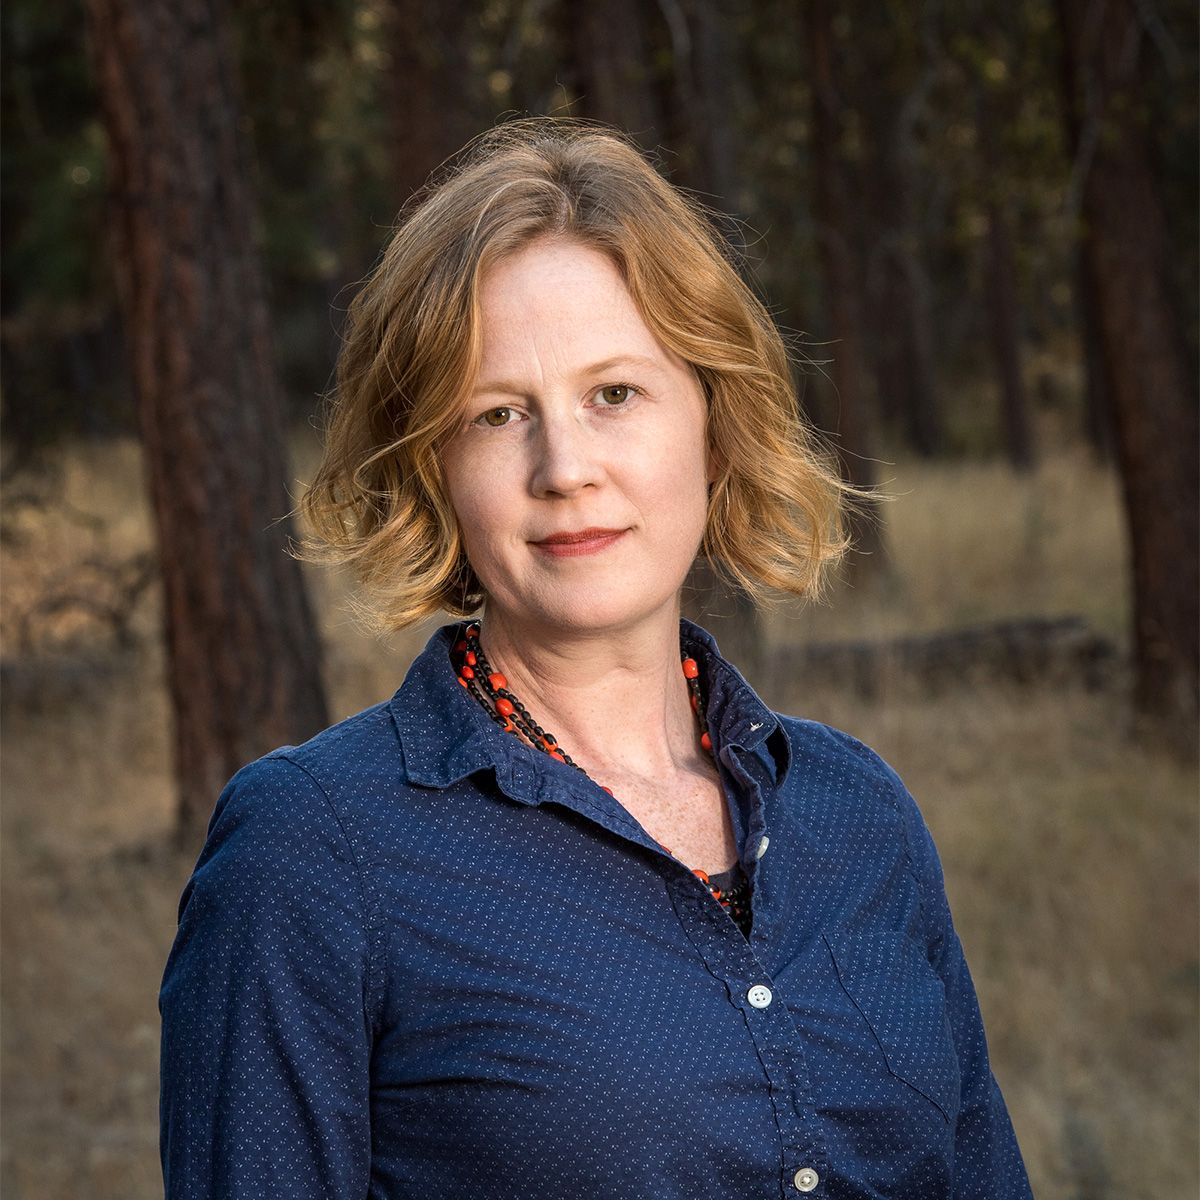 Author Emma Marris stands in front of a forest